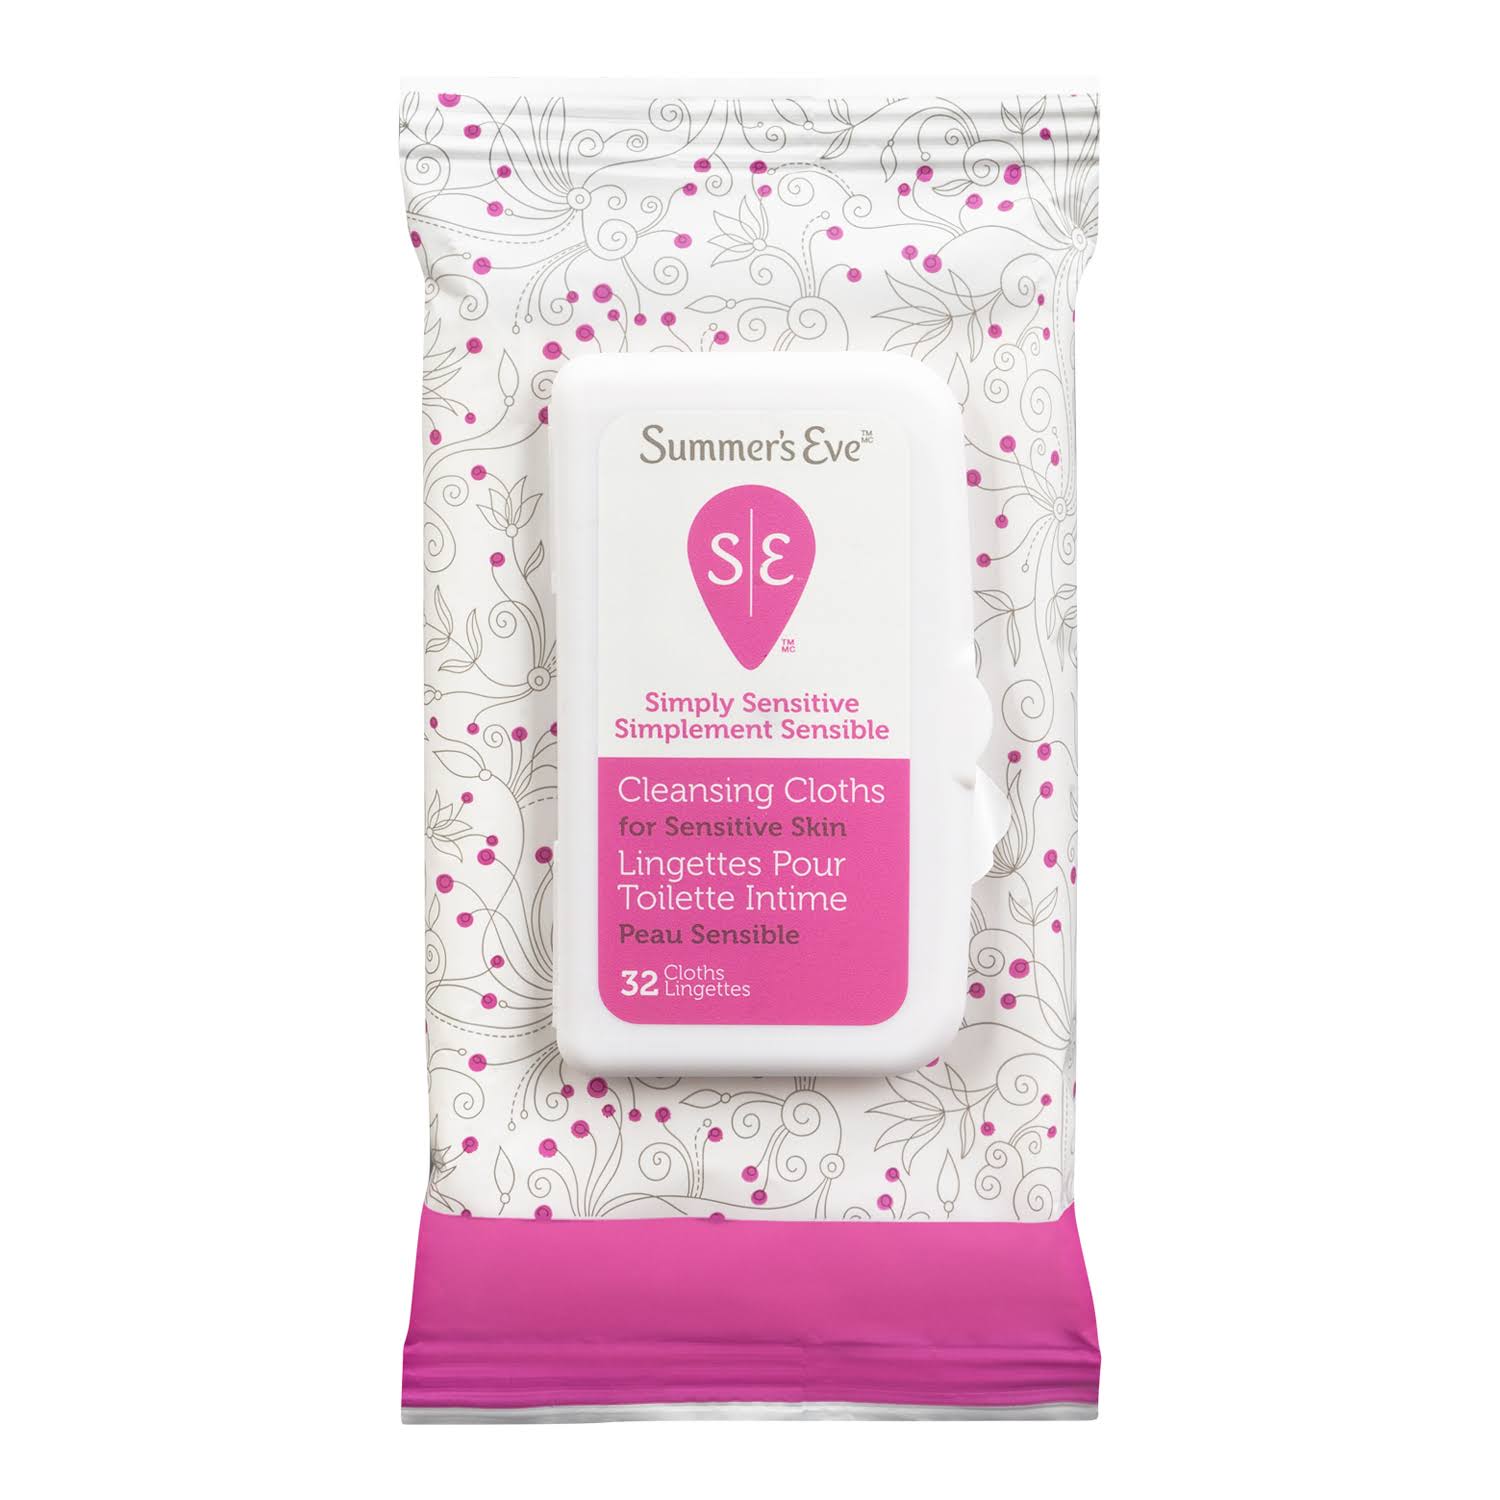 Summer's Eve Cleansing Cloths - 32 Cloths